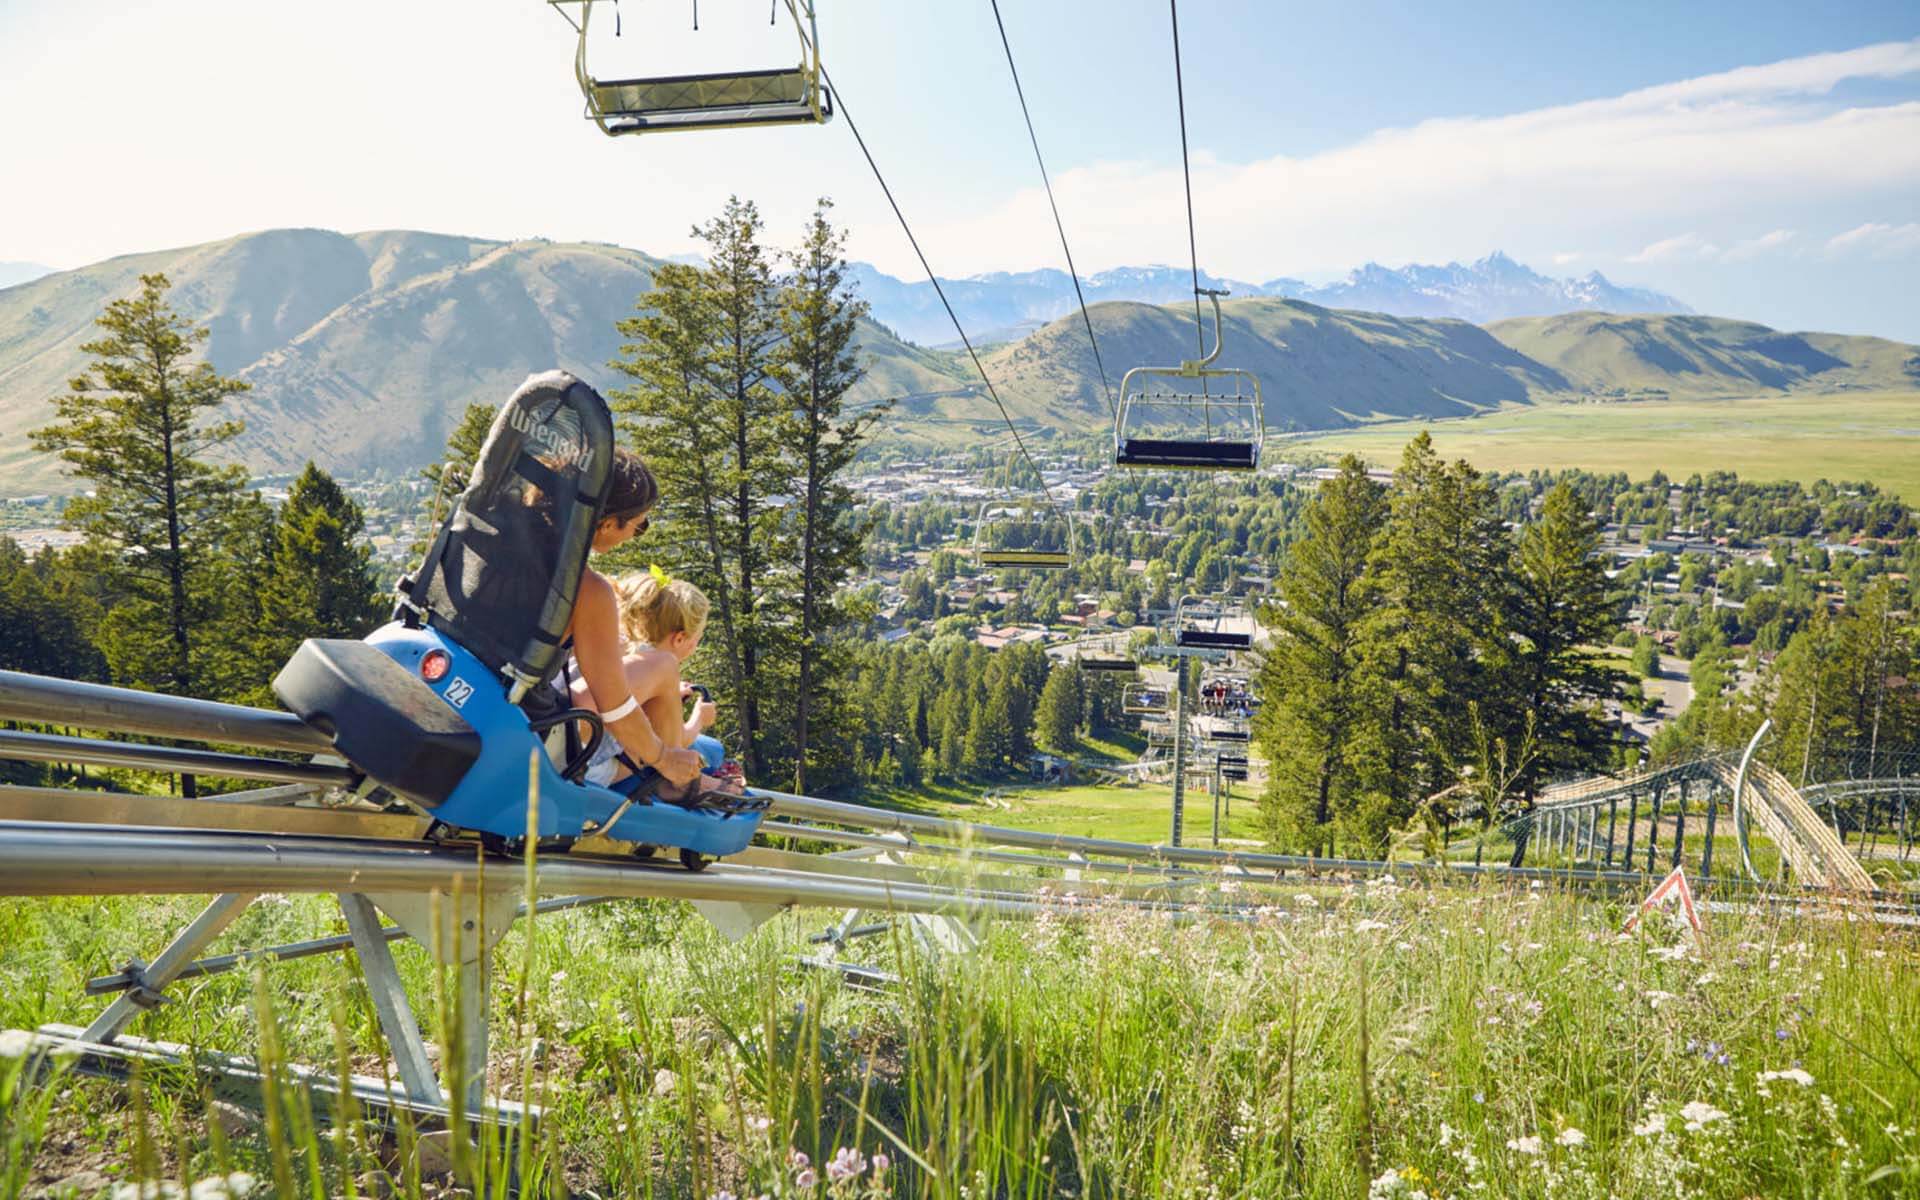 Things to do in Jackson Hole